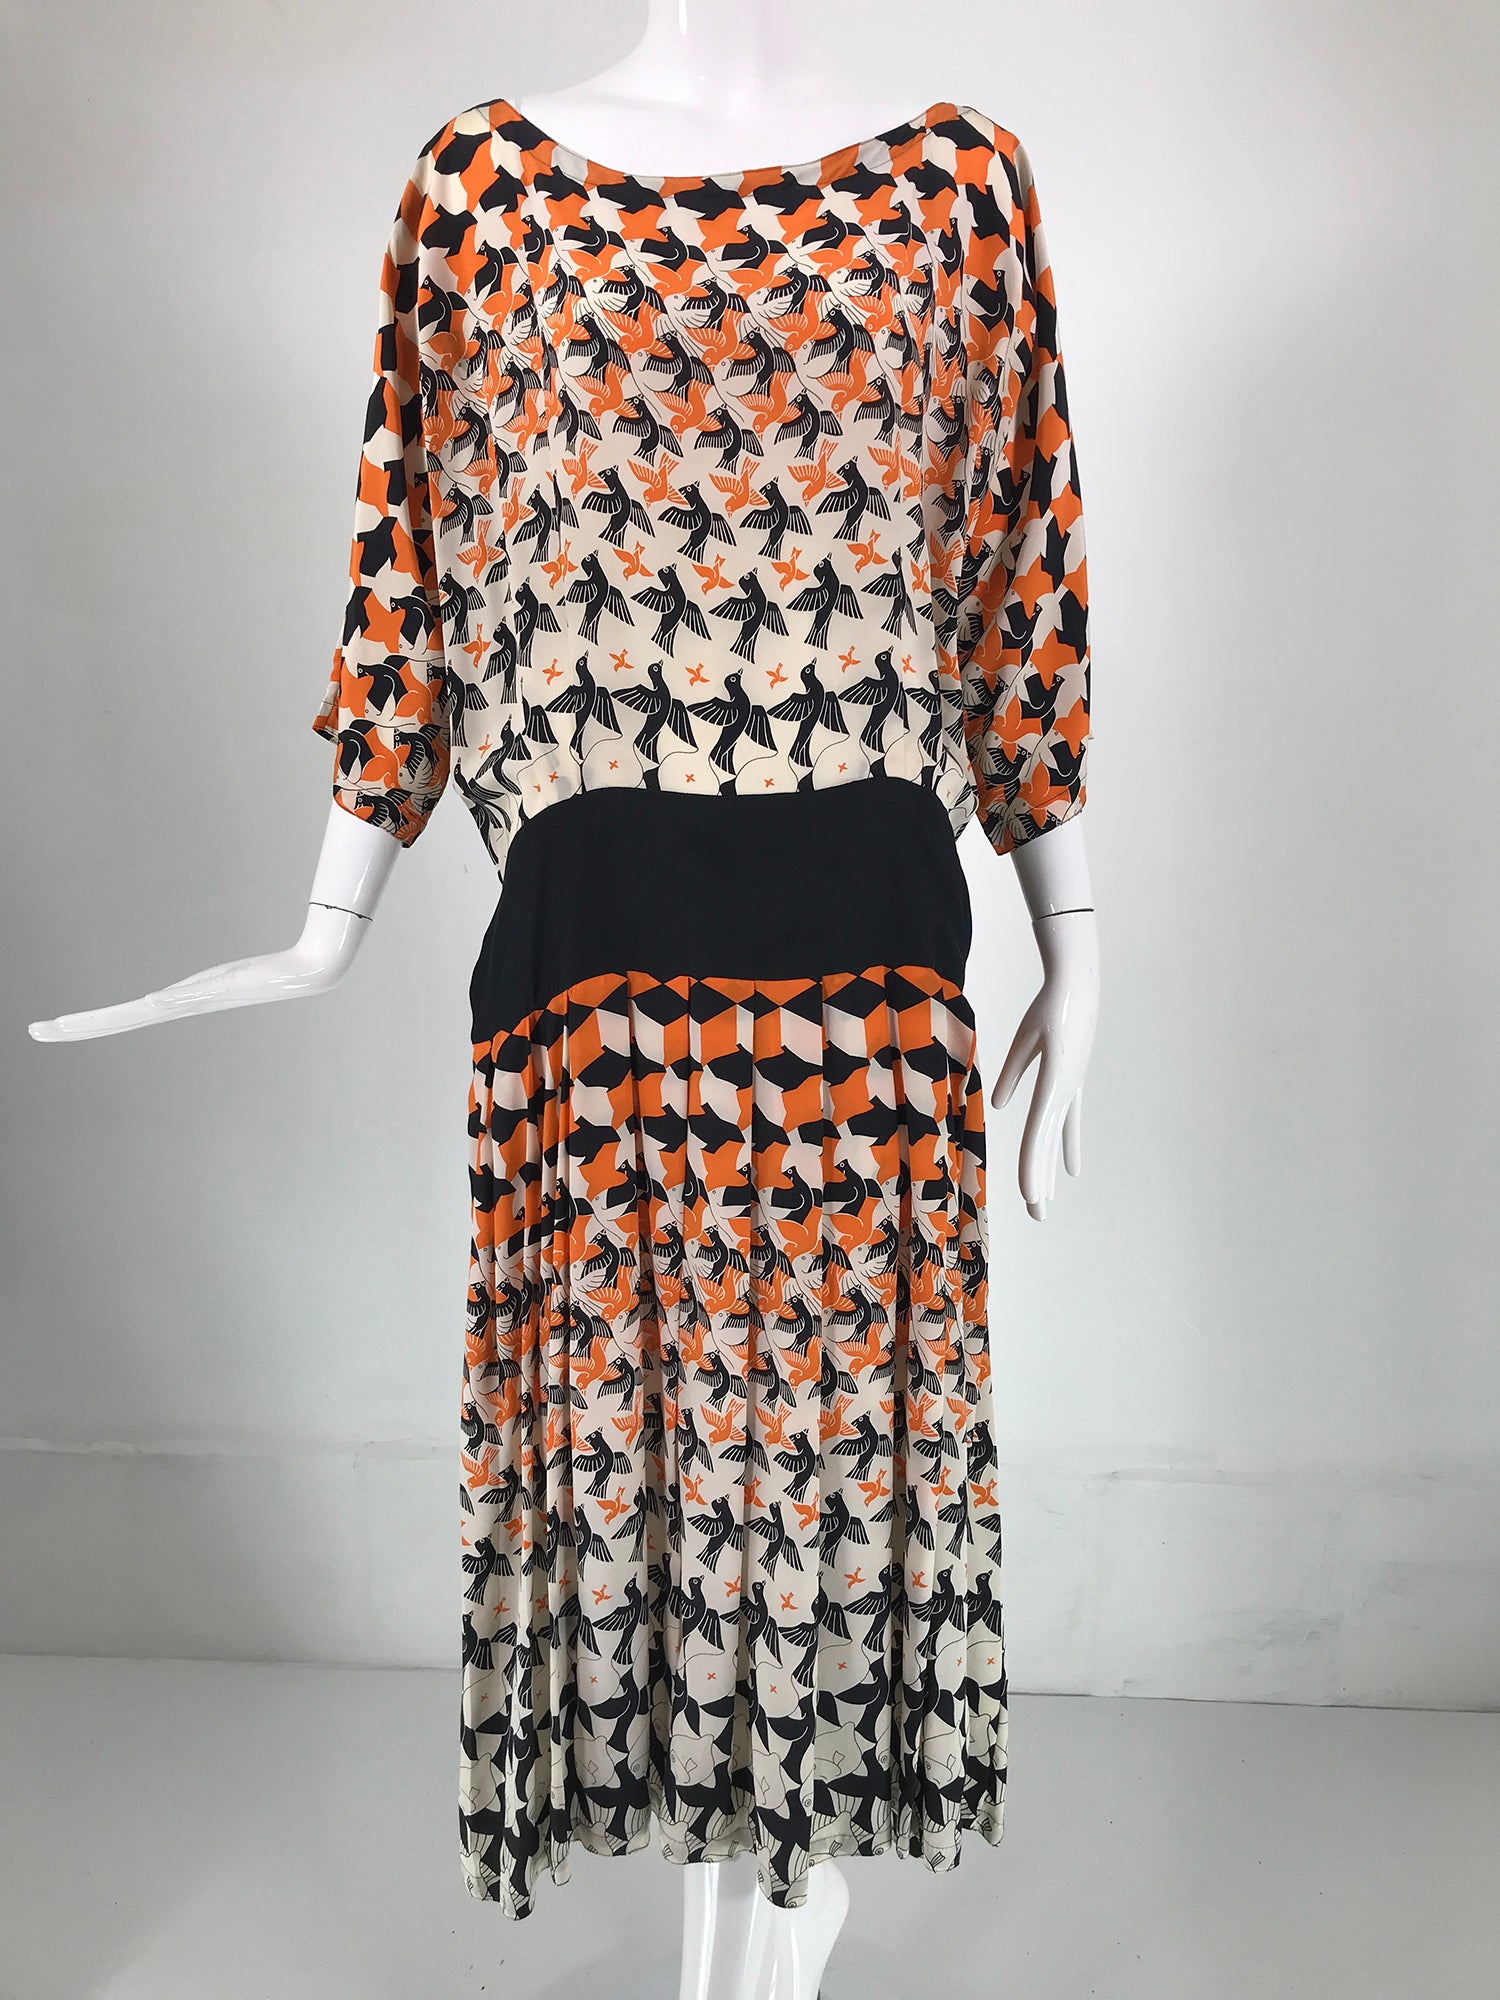 M C Escher tessellated silk print dress by Loretta Di Lorenzo, Italy from the 1980s. Birds & fishes ascending design in black, orange and white silk. Open neck dress, kimono sleeves with a wide black silk hip band that ties at the back or wraps to